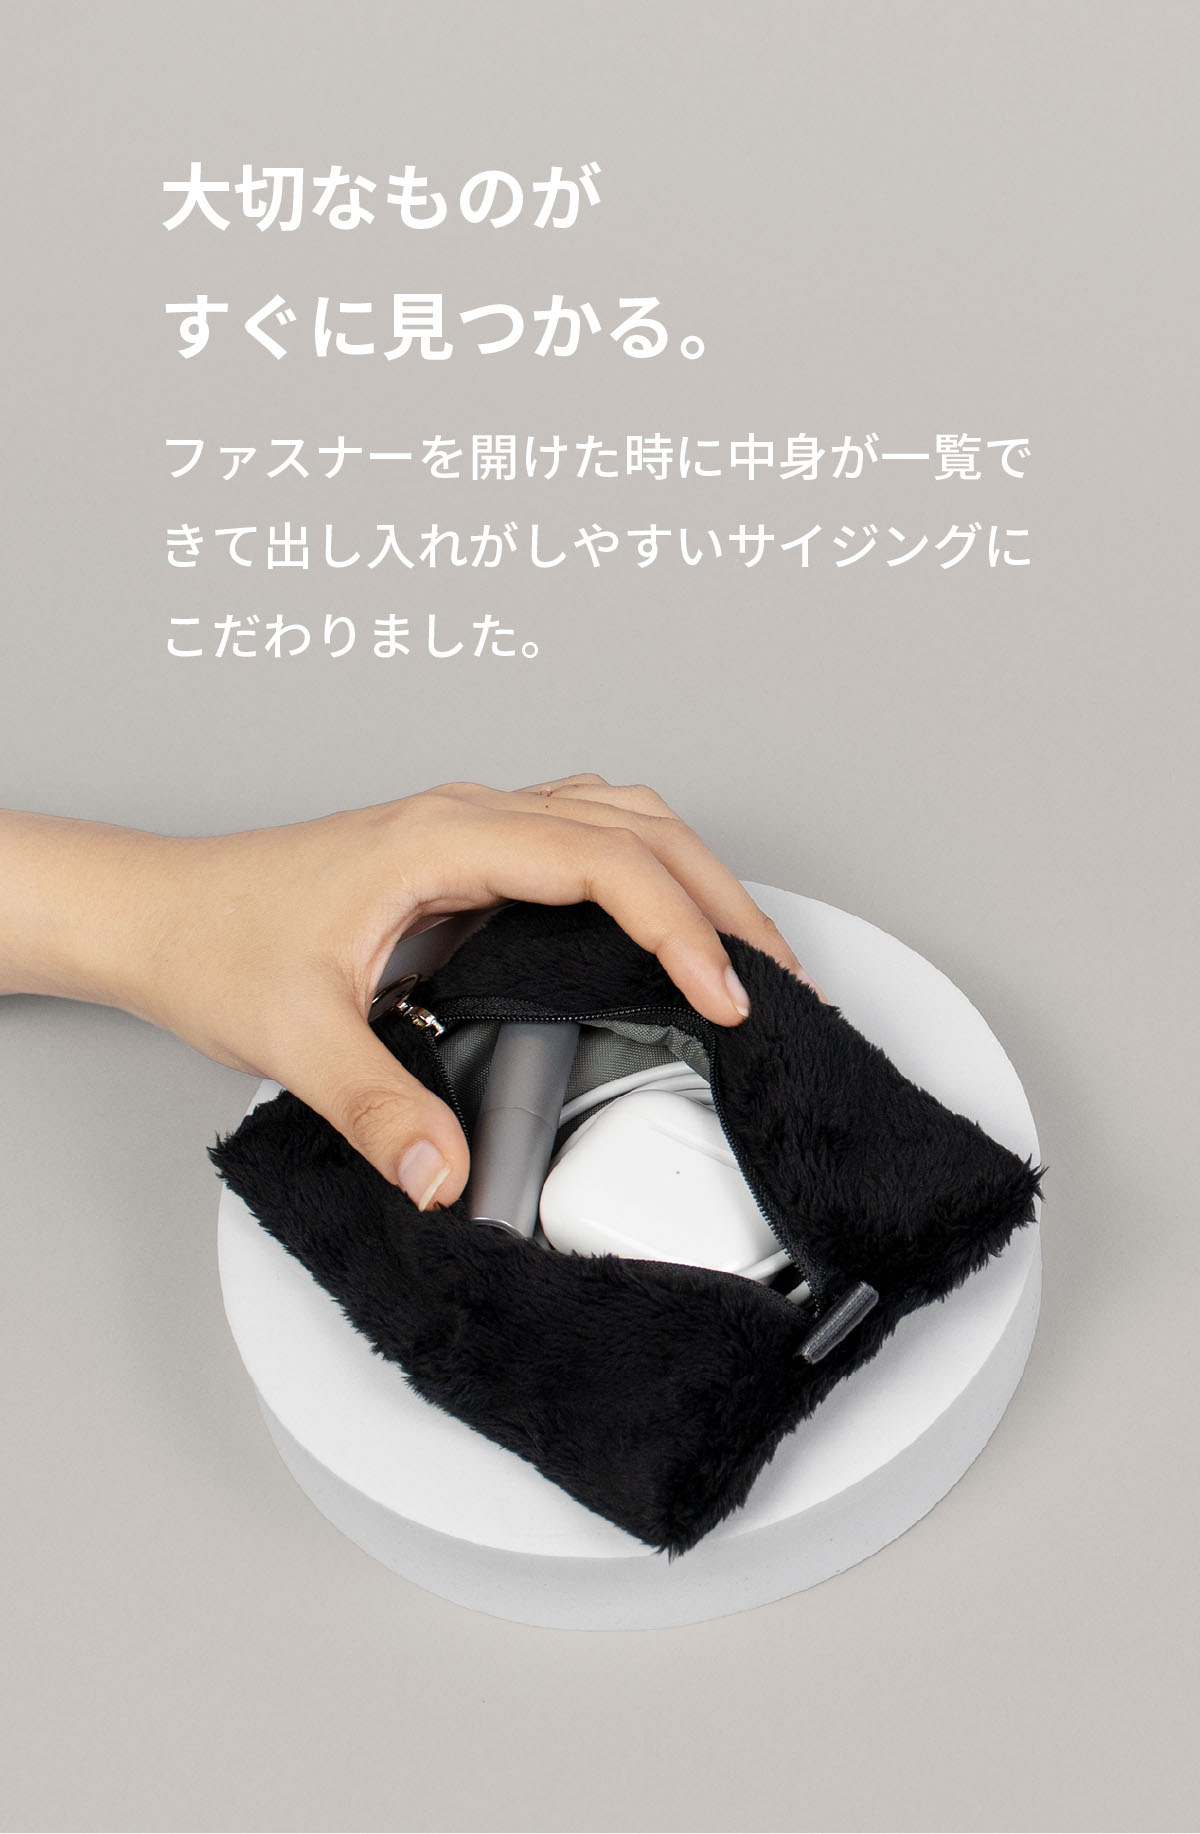 Fluff Pouch（フラッフポーチ）Sサイズ 化粧品 コスメポーチ メンズ 小物 ガジェット 送料無料 新生活 ギフト プレゼント プチギフト｜asoboze｜06